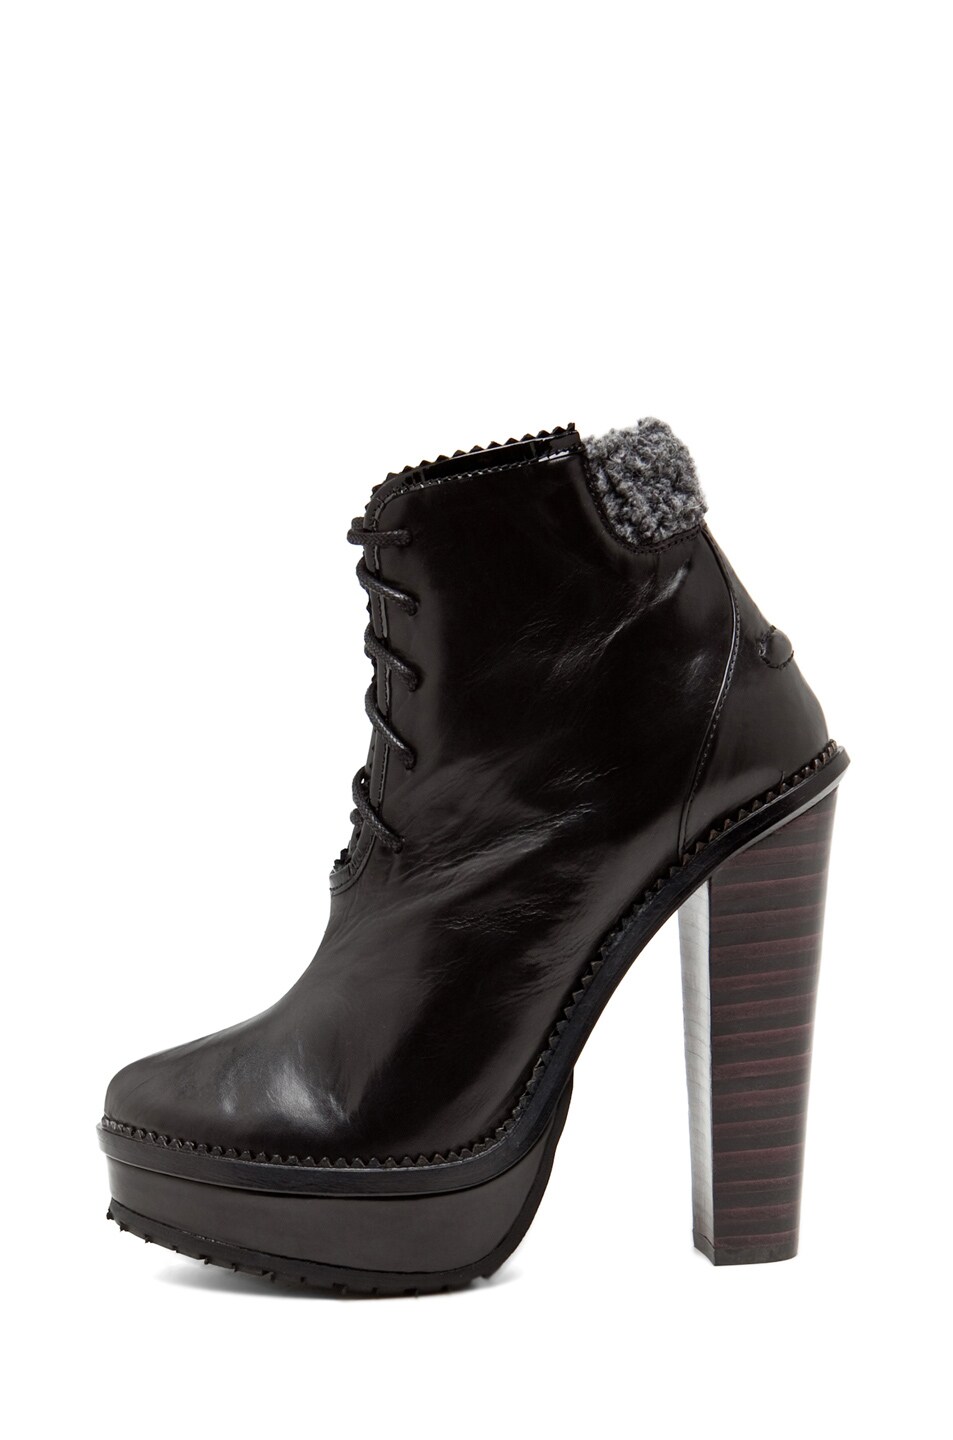 Image 1 of Opening Ceremony Laetitia Lace Up Bootie in Black